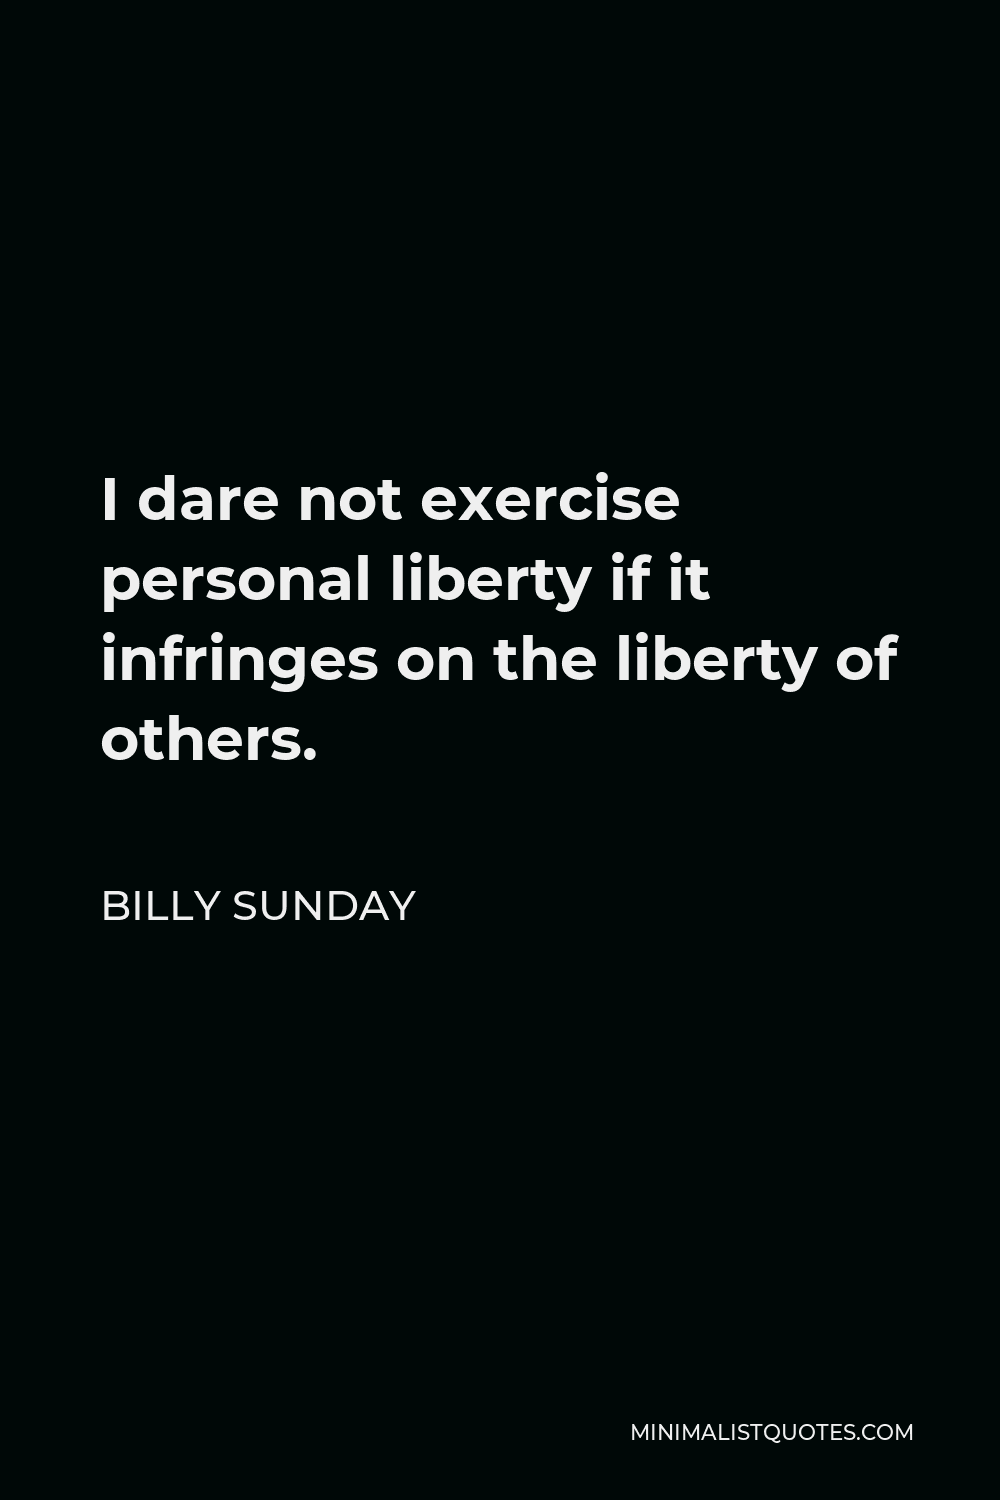 Billy Sunday Quote - I dare not exercise personal liberty if it infringes on the liberty of others.